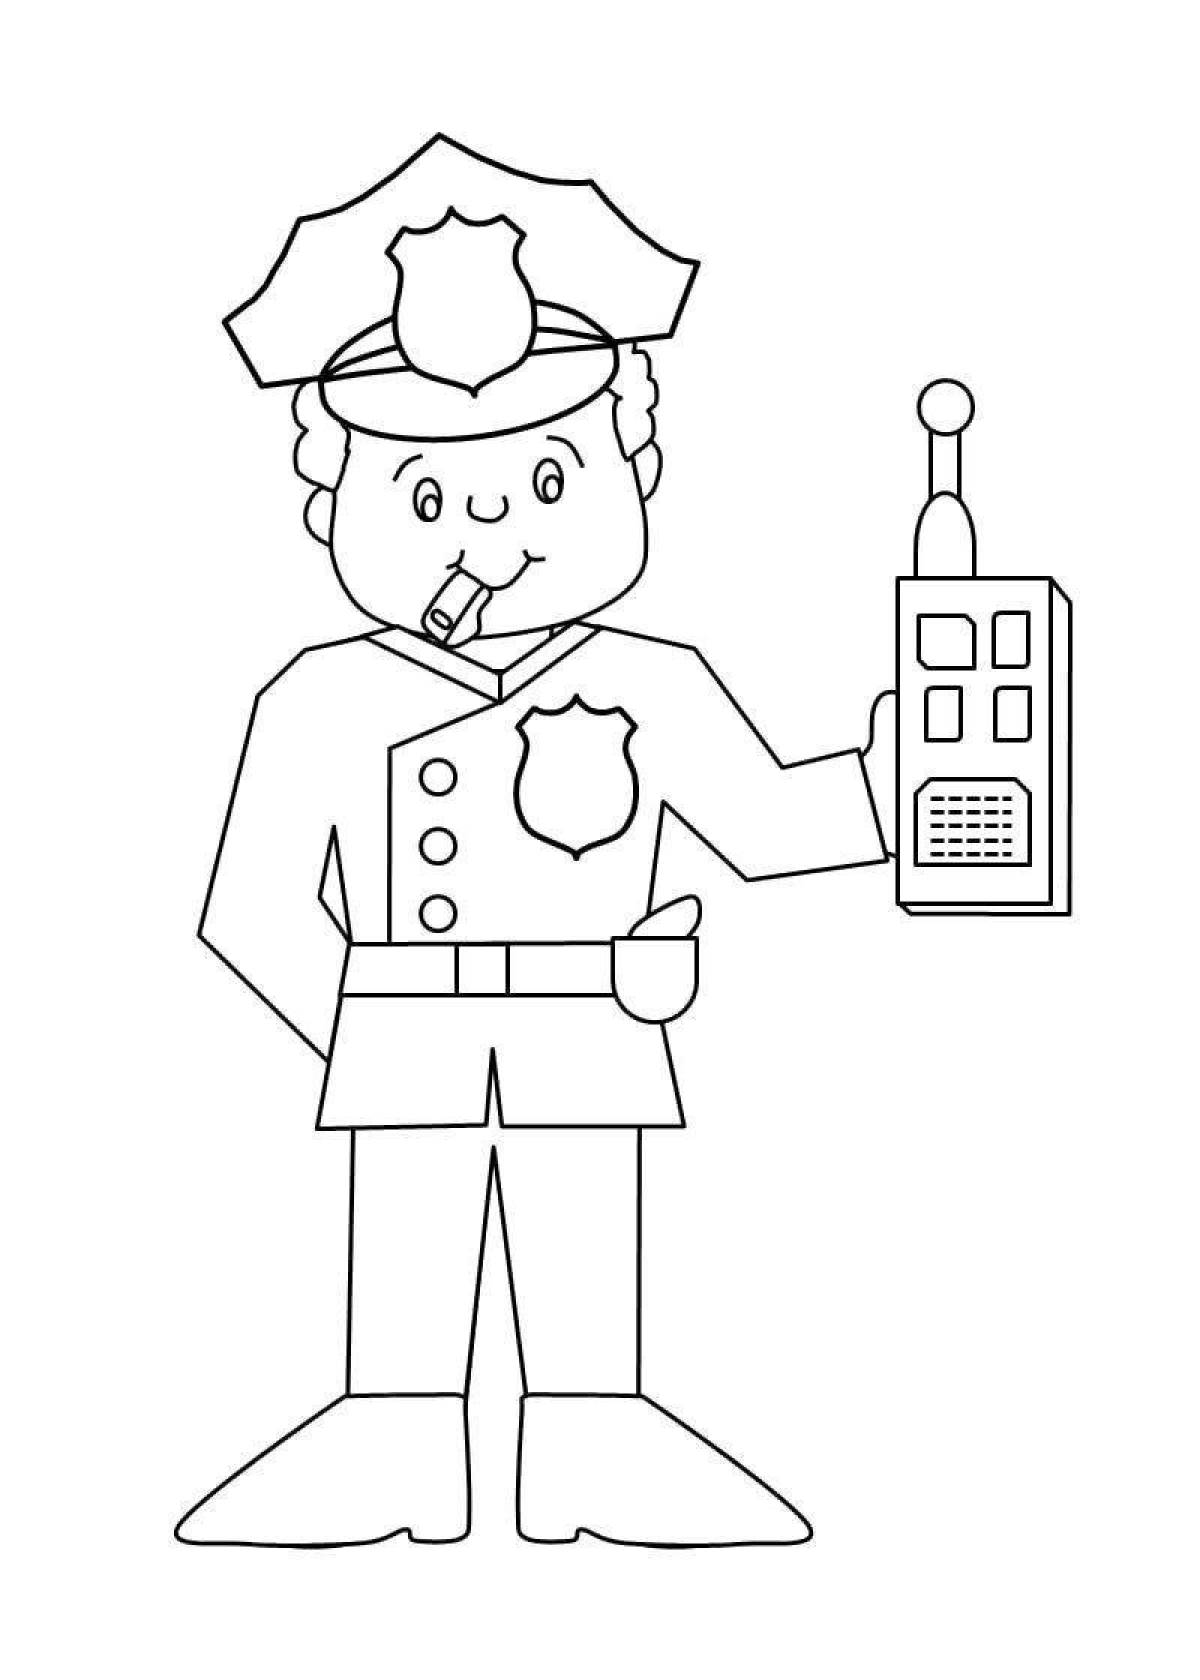 Outstanding police robot coloring book for kids